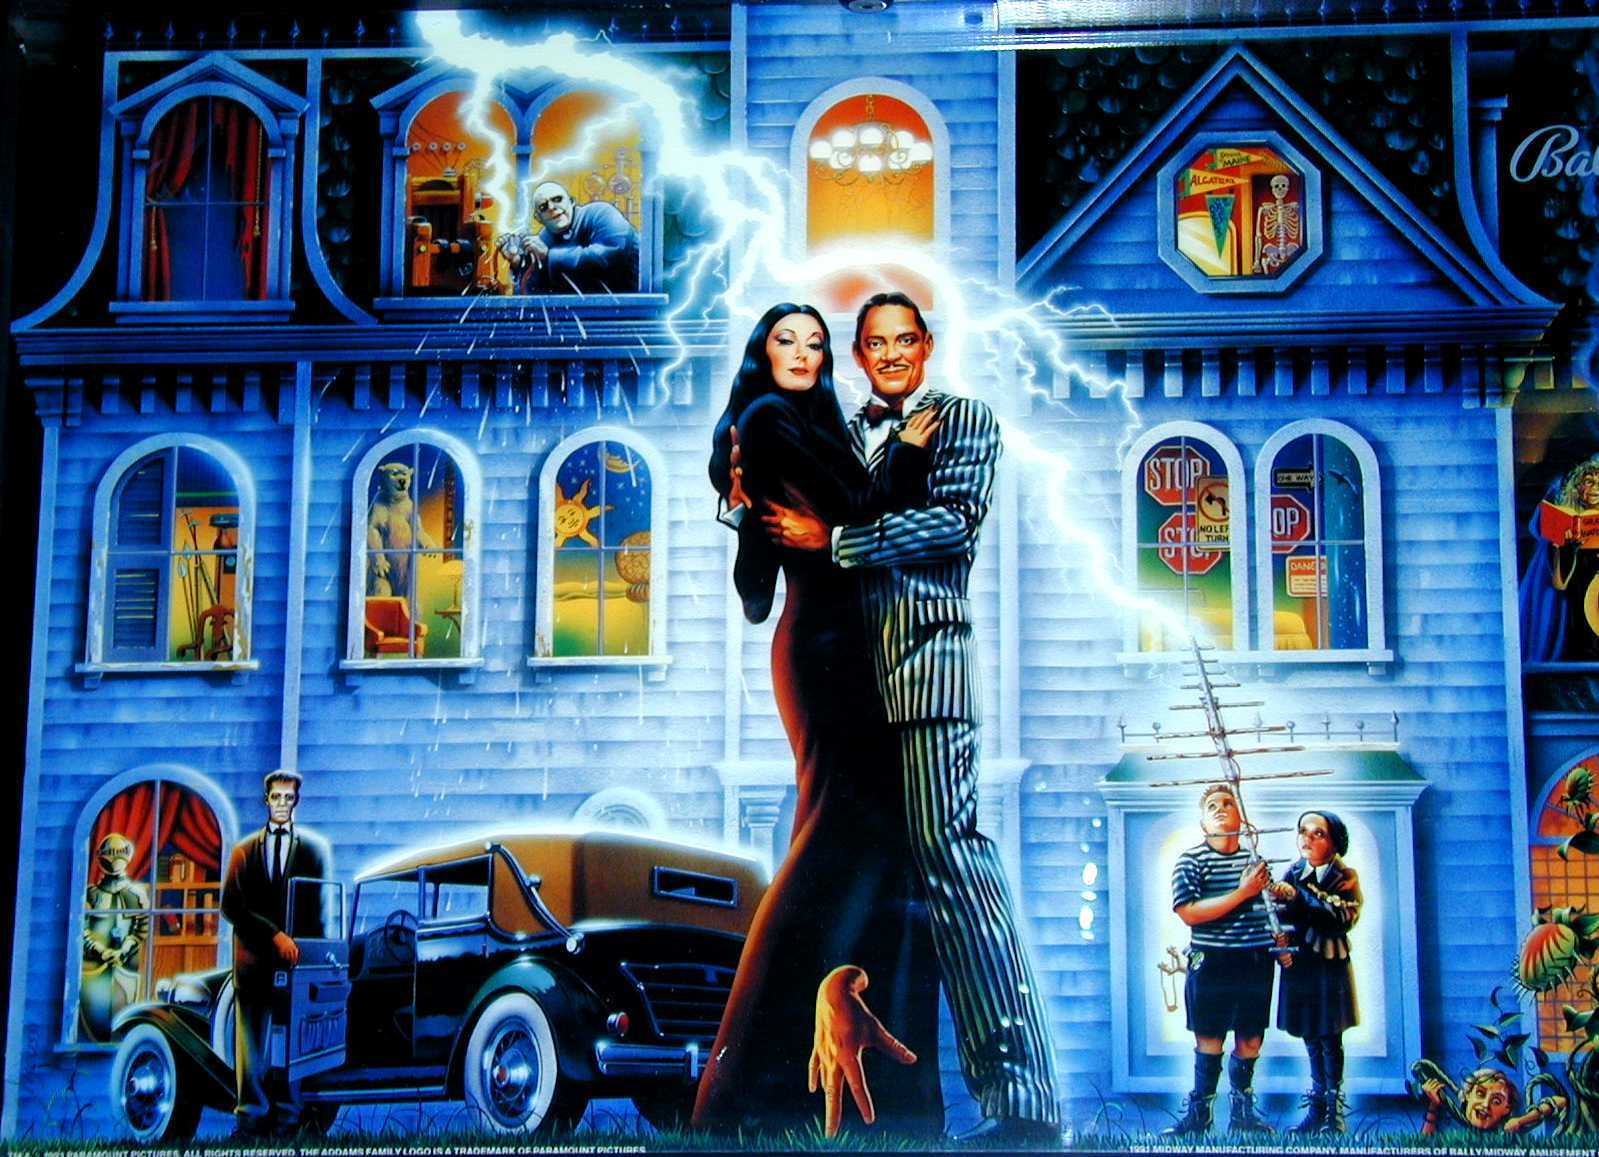 Addams Family Wallpaper. Addams Family Background